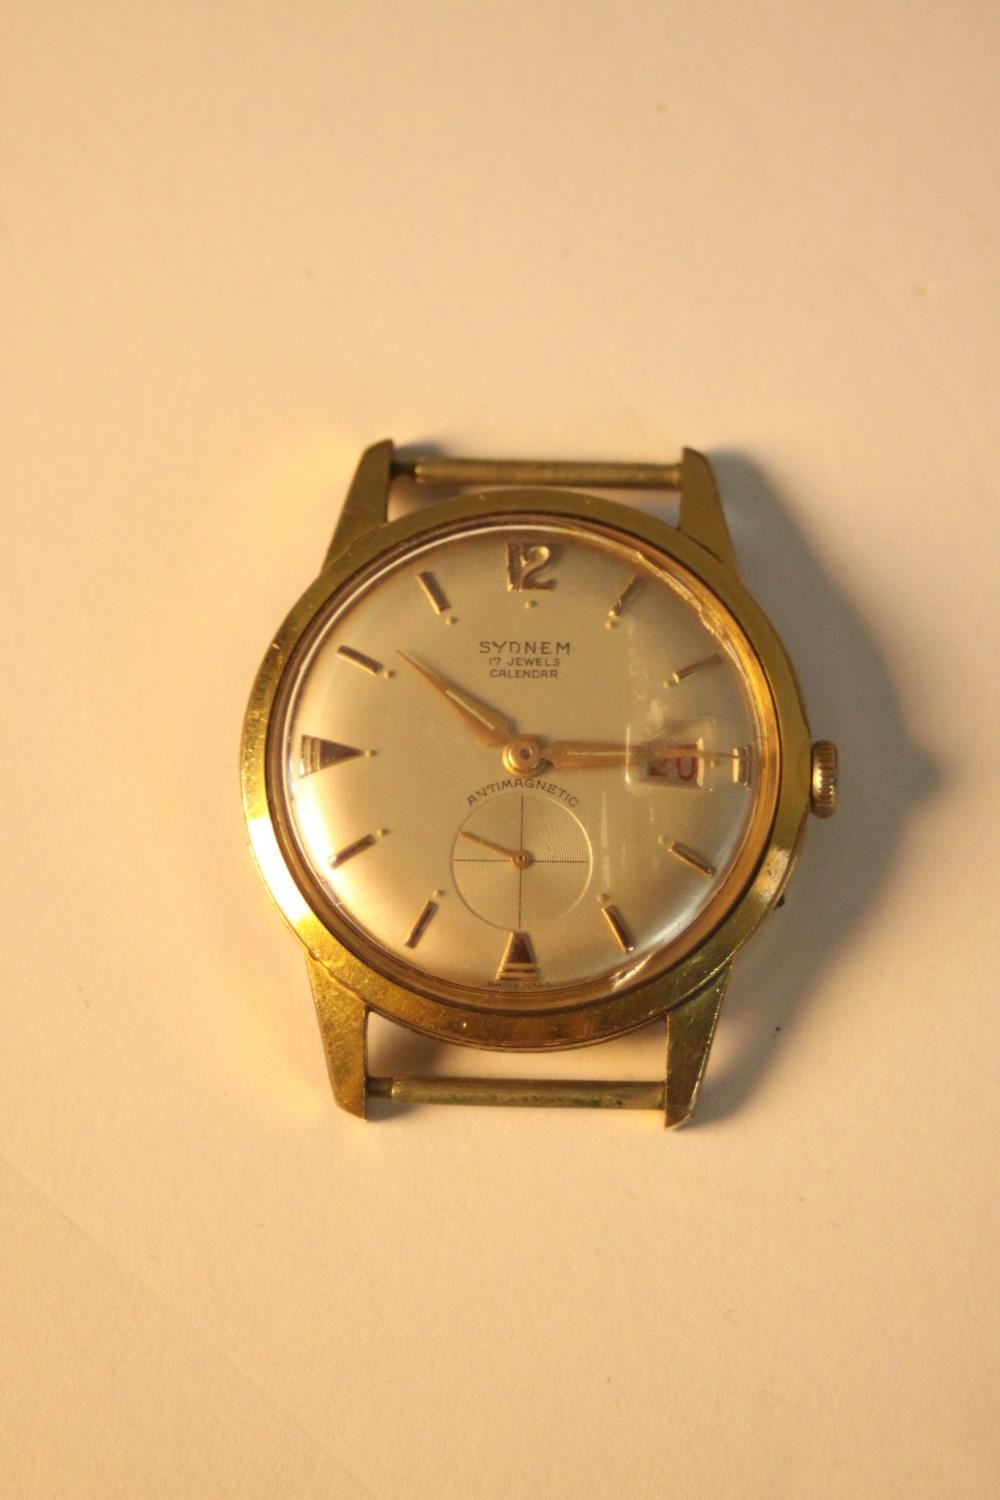 A Sydnem gentleman's automatic antimagnetic 10ct gold plated watch with calendar and rose gold - Image 8 of 11